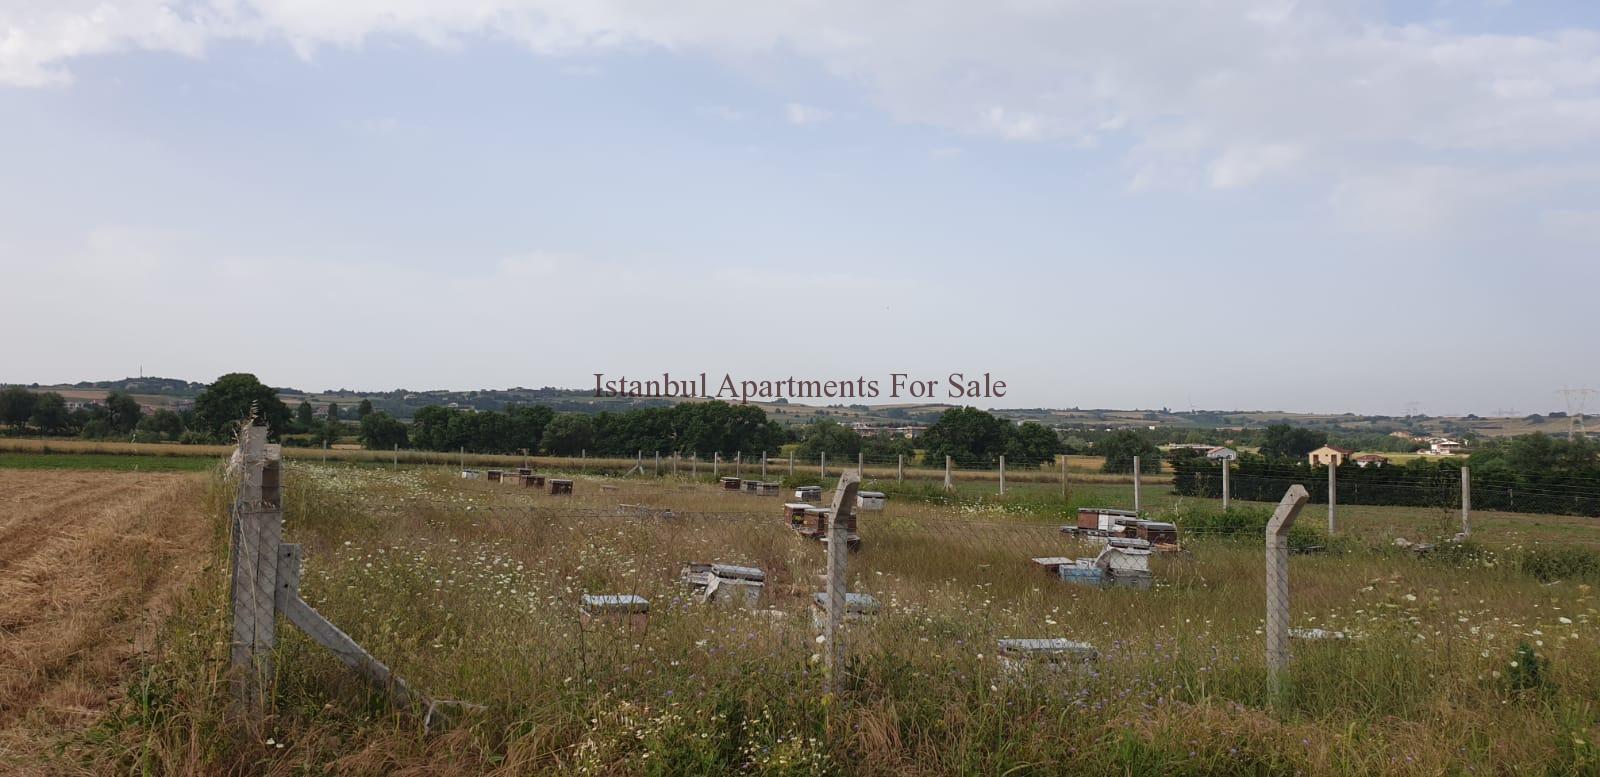 Istanbul Apartments For Sale in Turkey Building Land For Sale in Istanbul European Side  